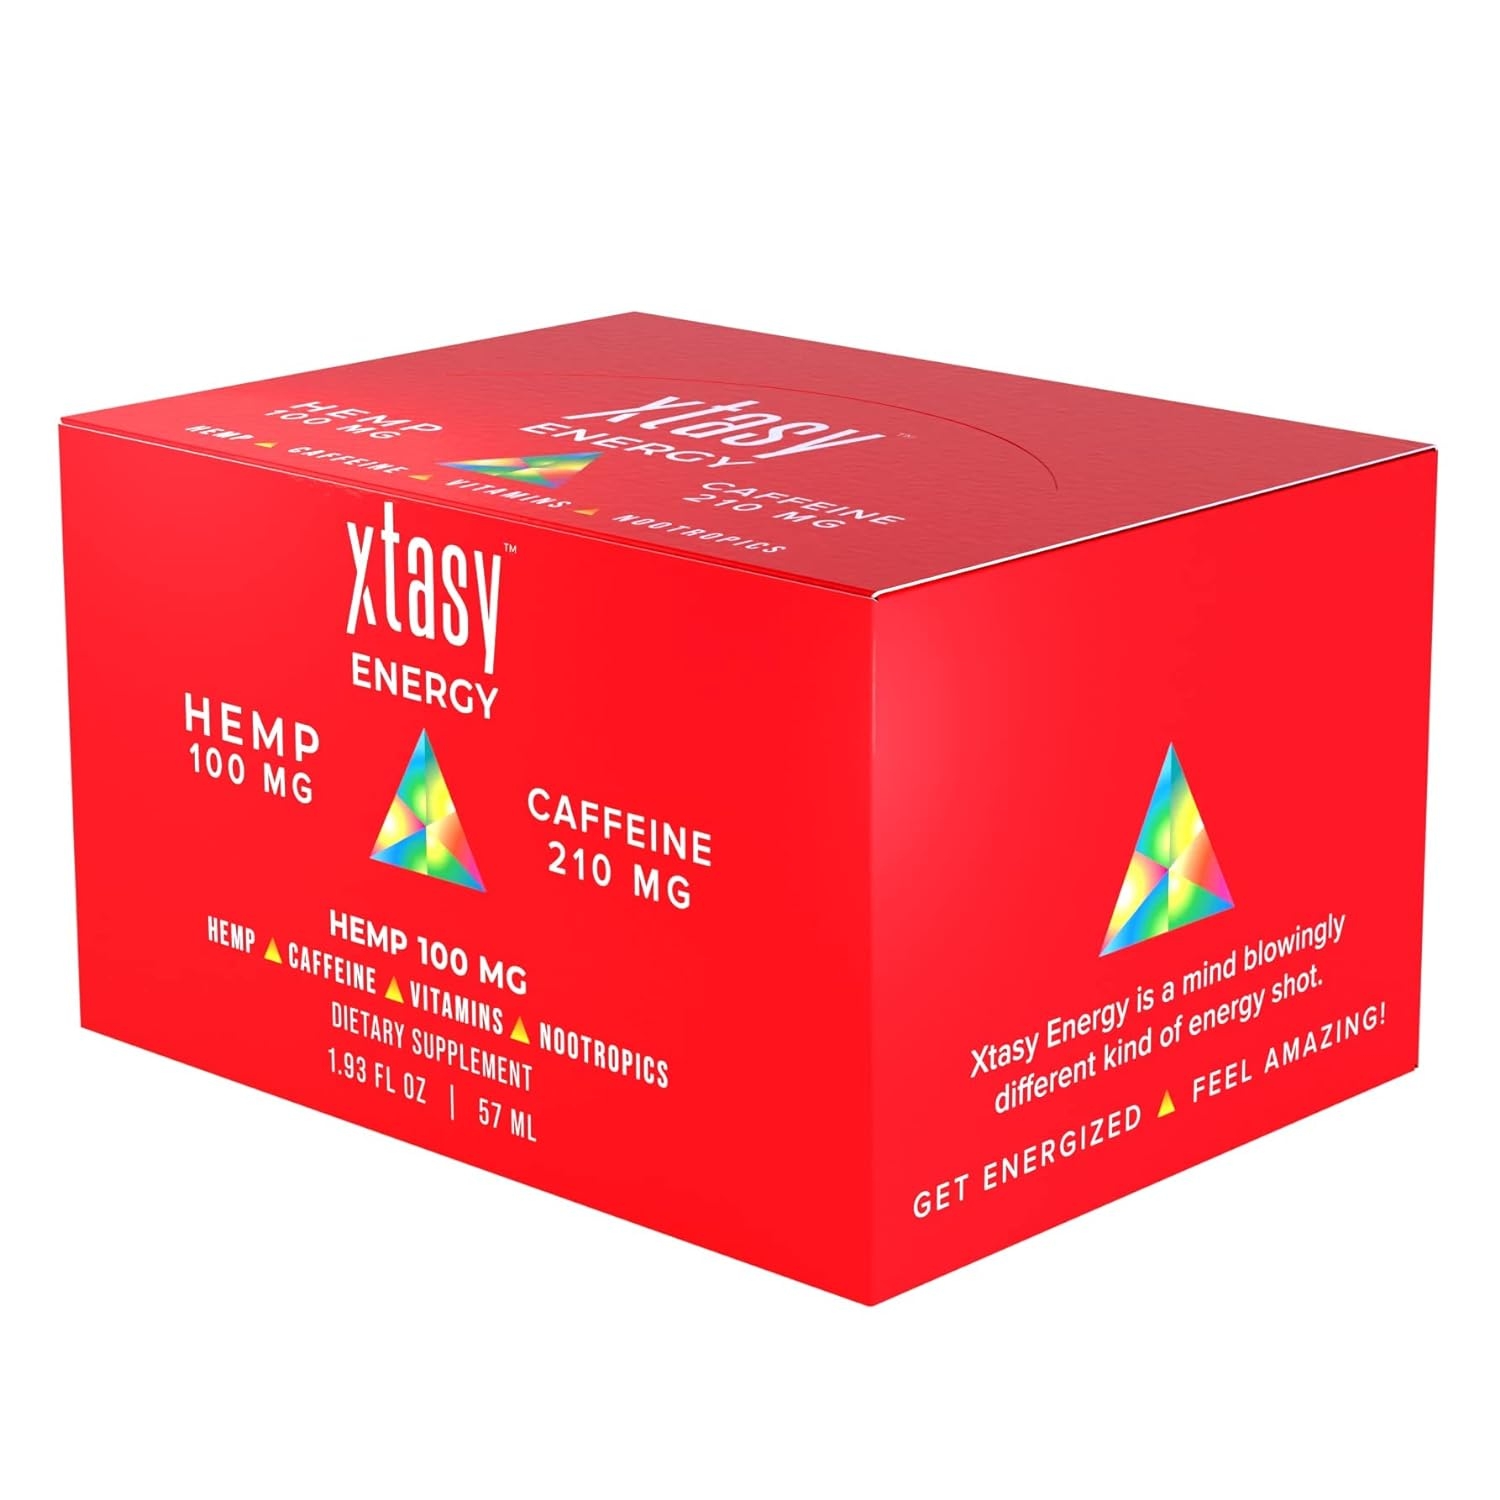 Xtasy Energy Shot - Energy Drink - Nootropic Pre-Workout - Xtasy Energy Powers Mind and Body Like No Other Pre-Workout or Energy Drink (3 Pack)